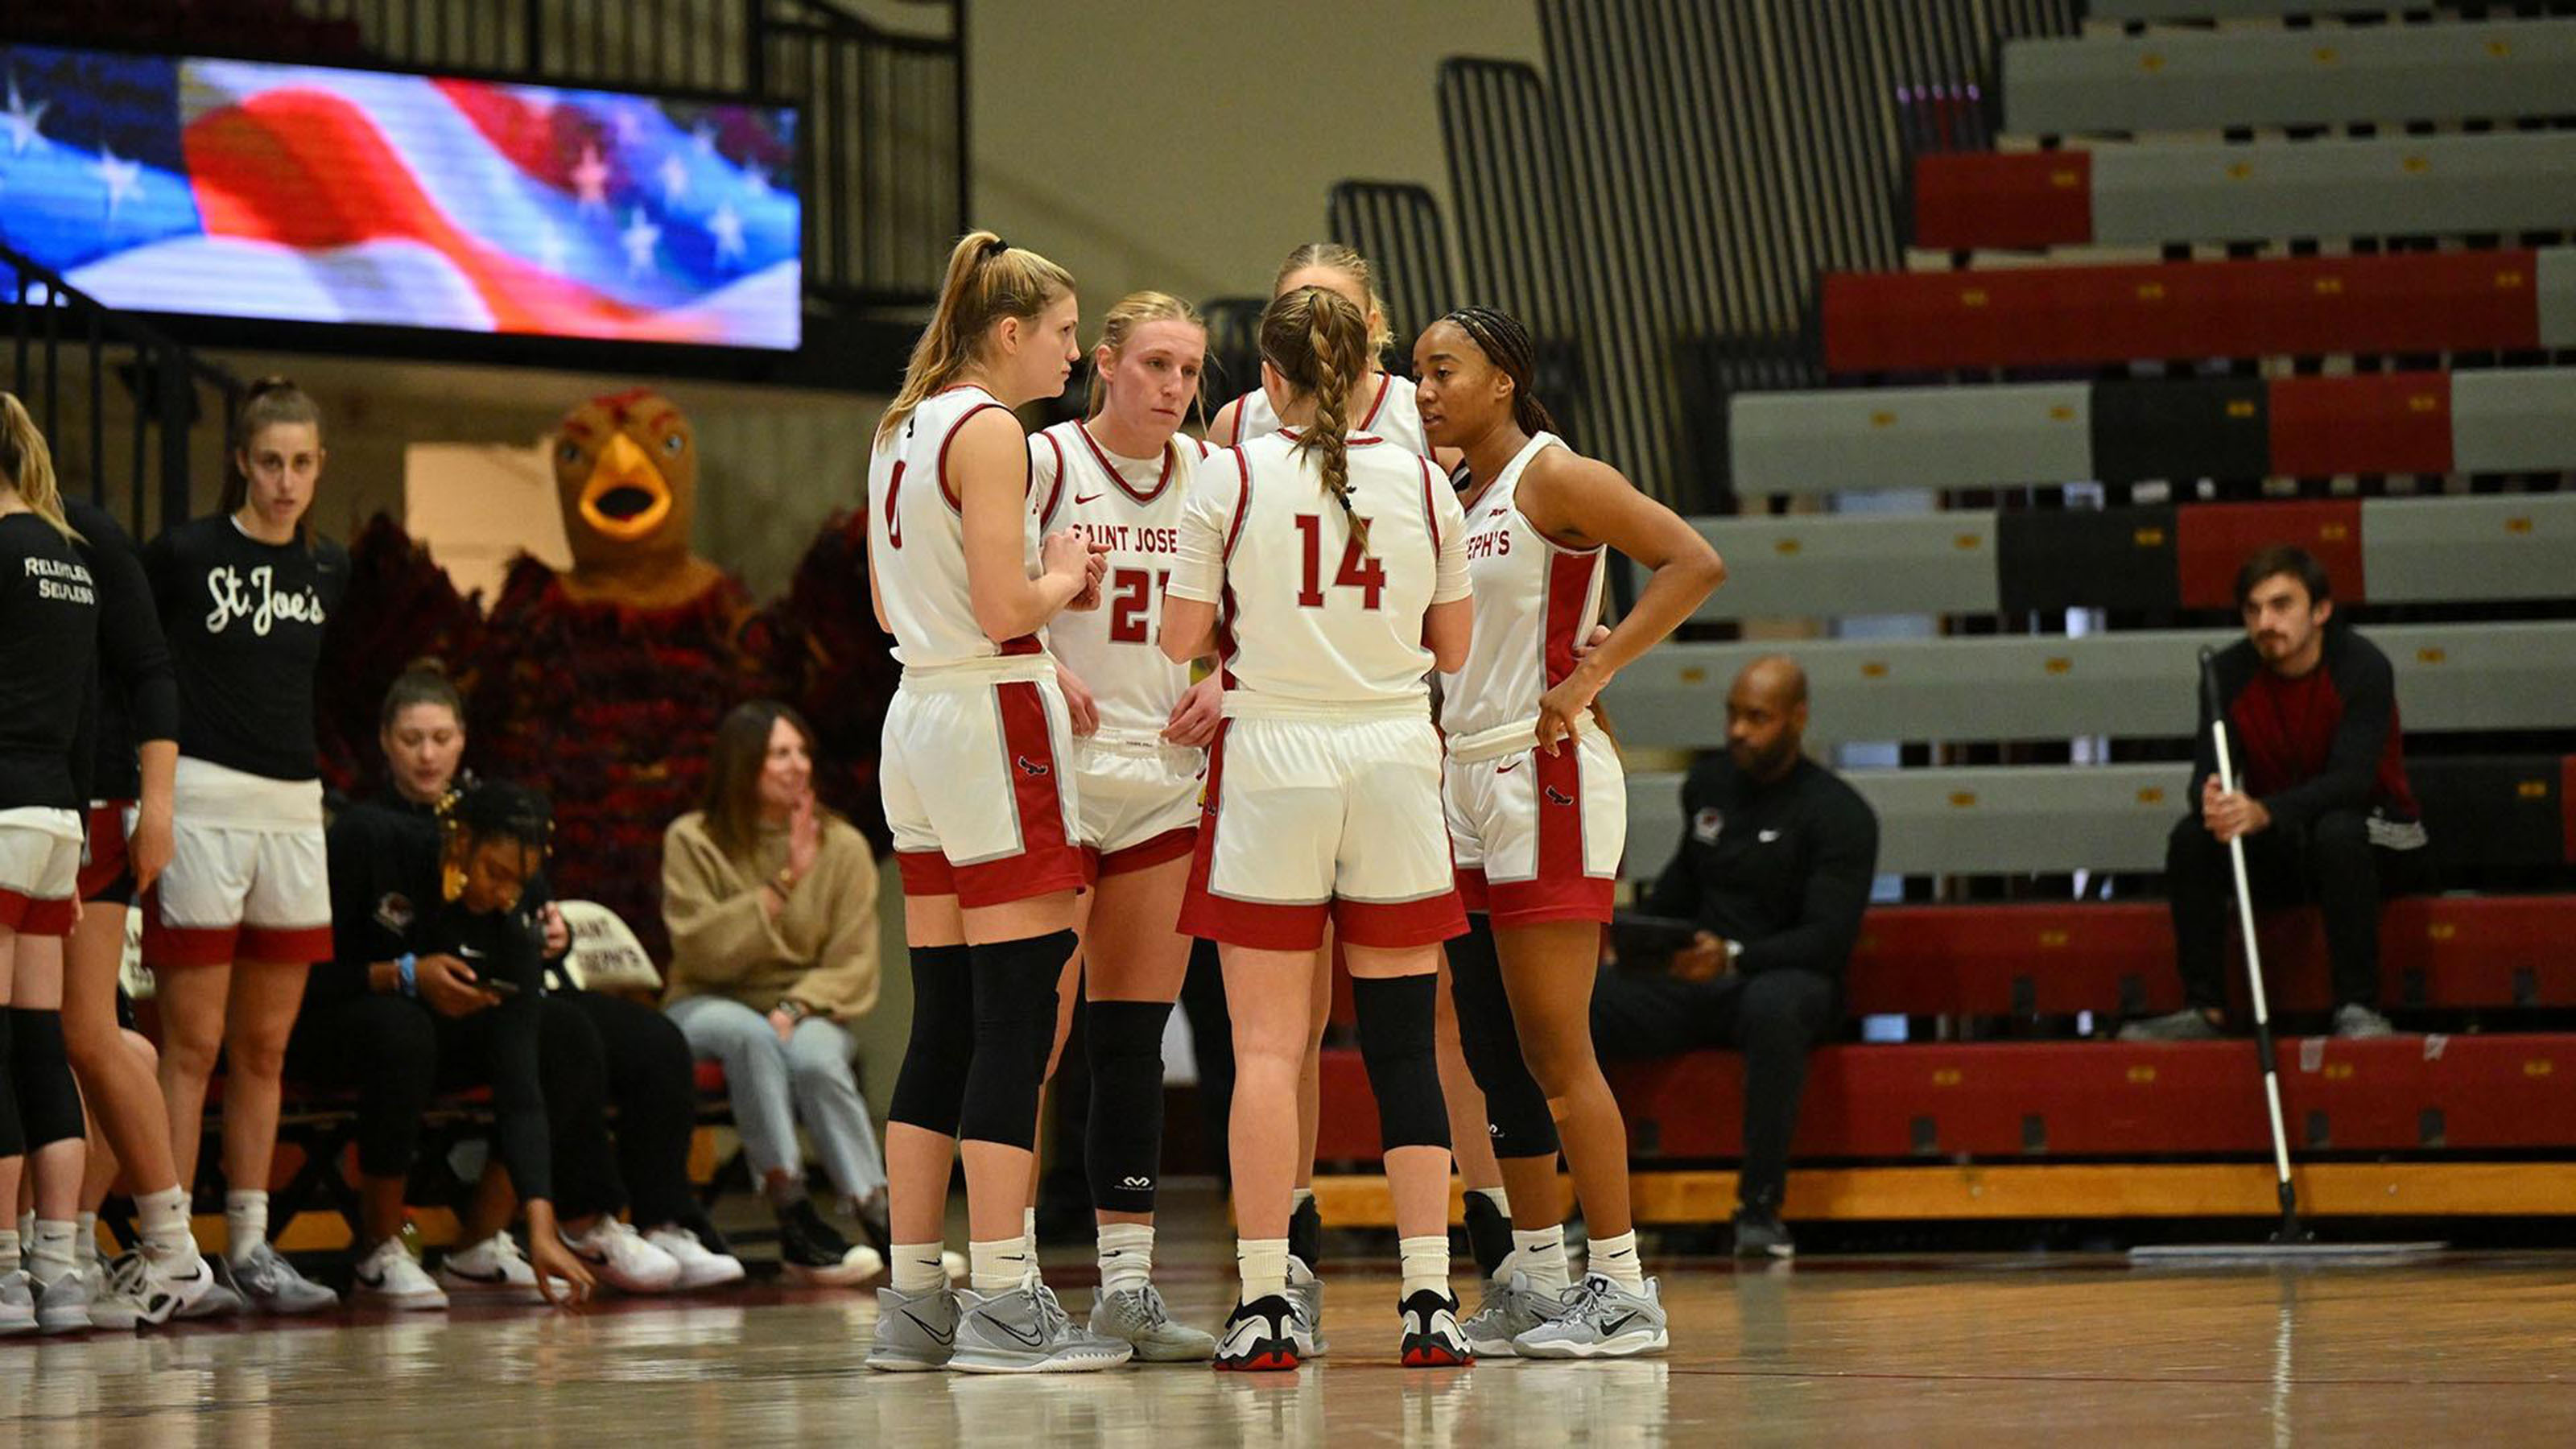 SJU Women's Basketball Team in a huddle on the court